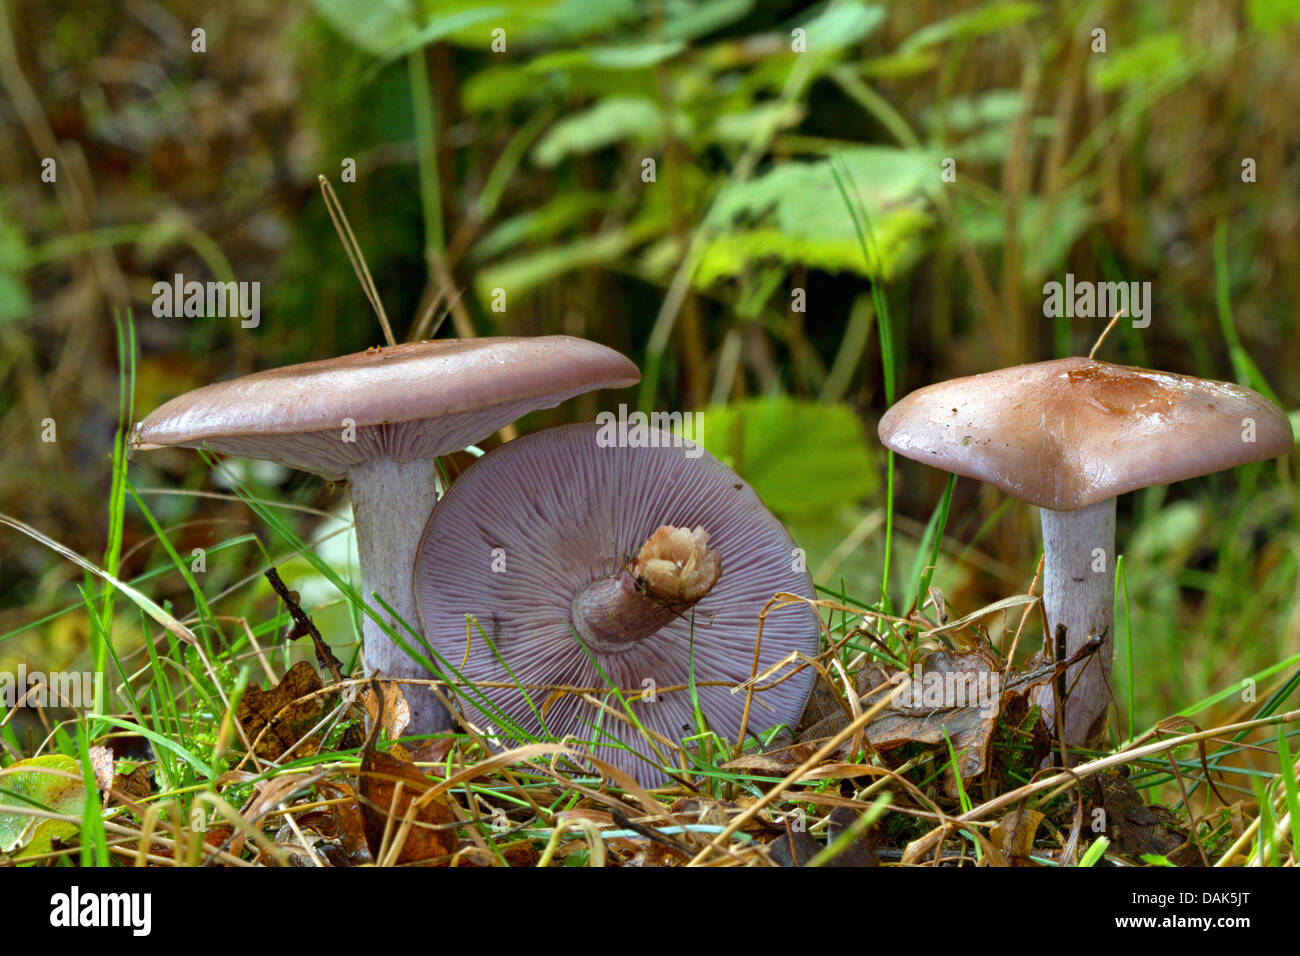 wood blewit (Lepista nuda), three fruiting bodies on forest floor, one of them turned around, Germany, Mecklenburg-Western Pomerania Stock Photo